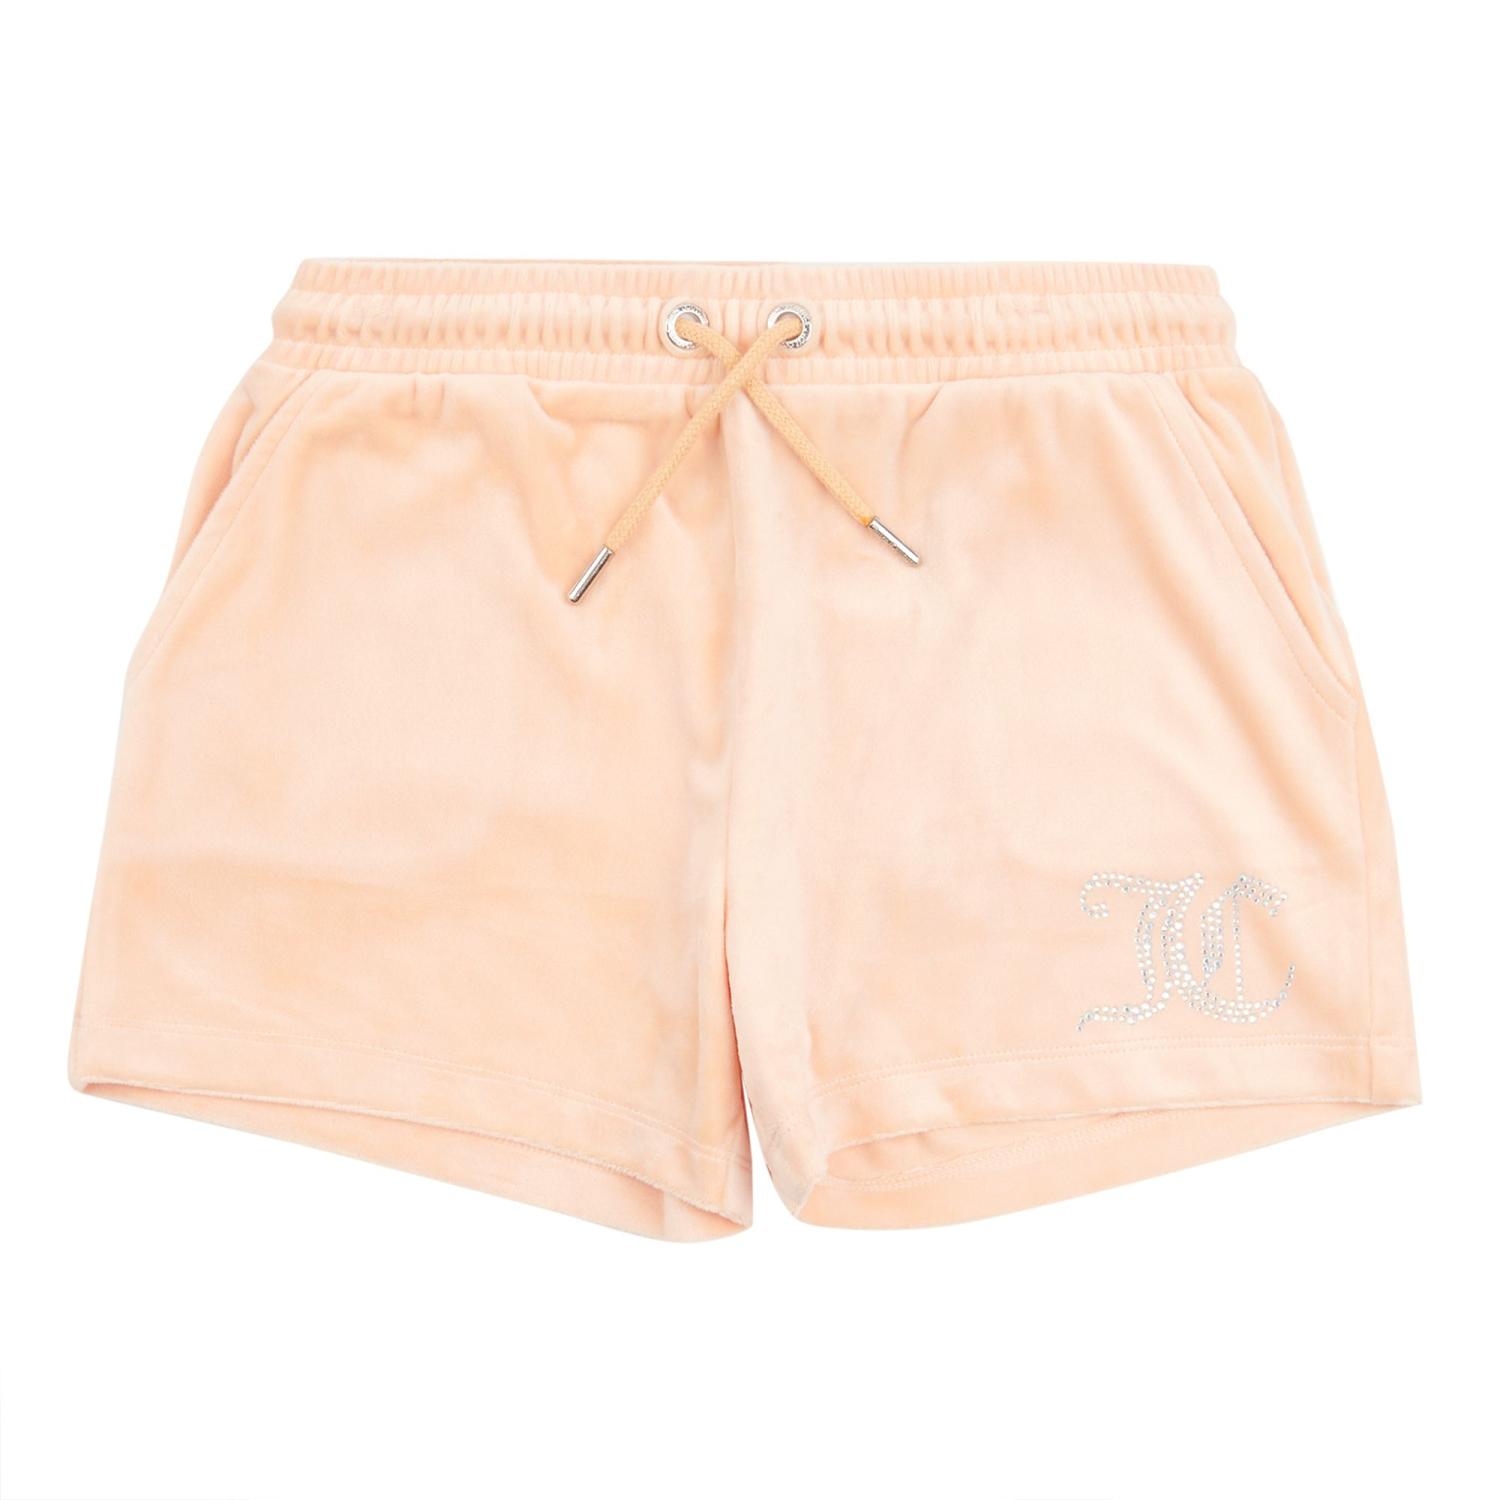 JUICY COUTURE VELOUR SHORTS BEACH SAND